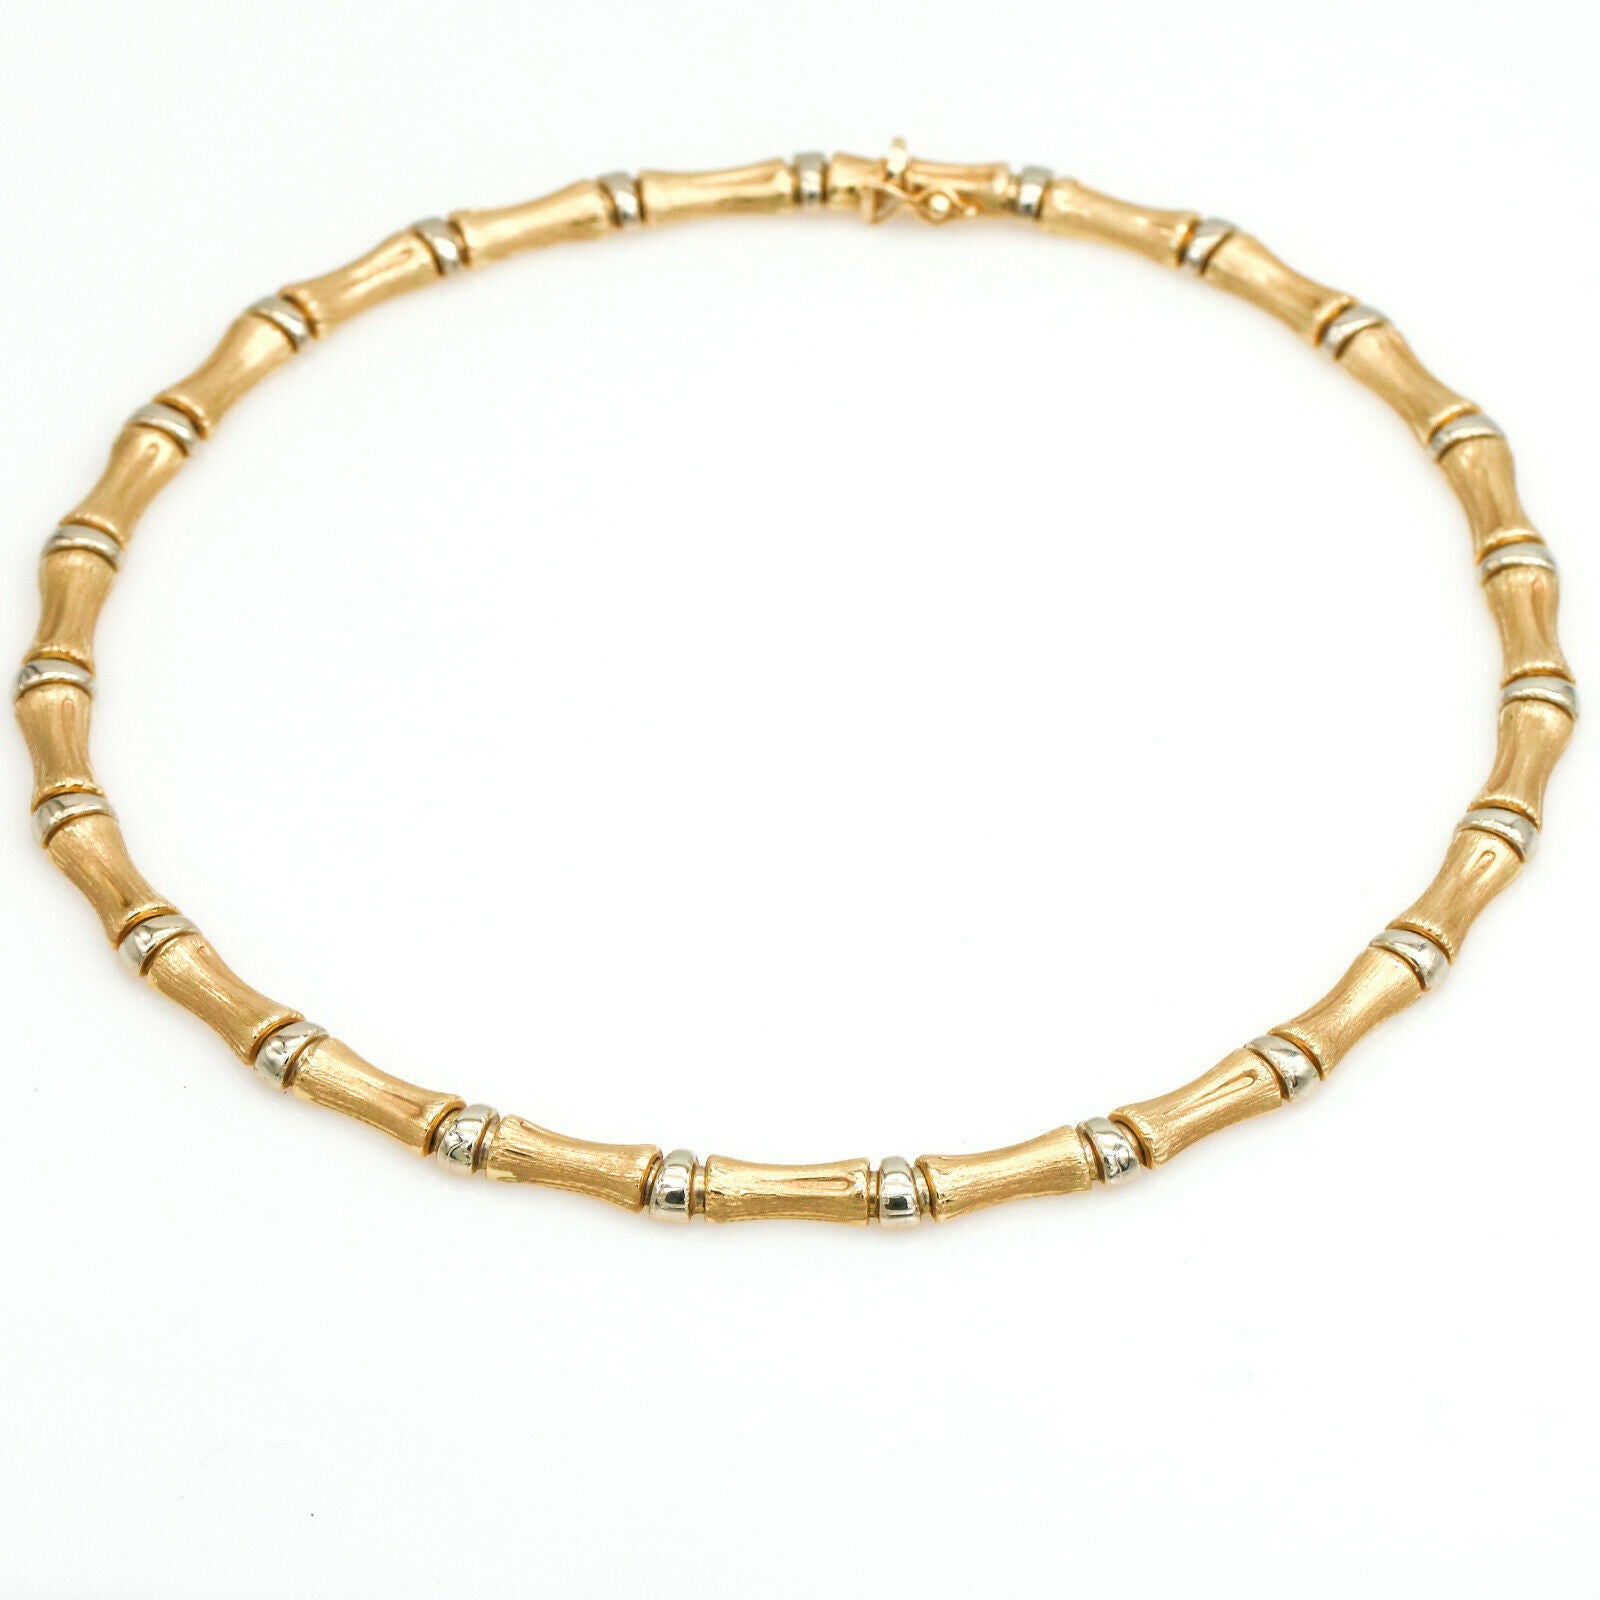 Bamboo Link Chain Necklace in 14k White and Yellow Gold Italian Made